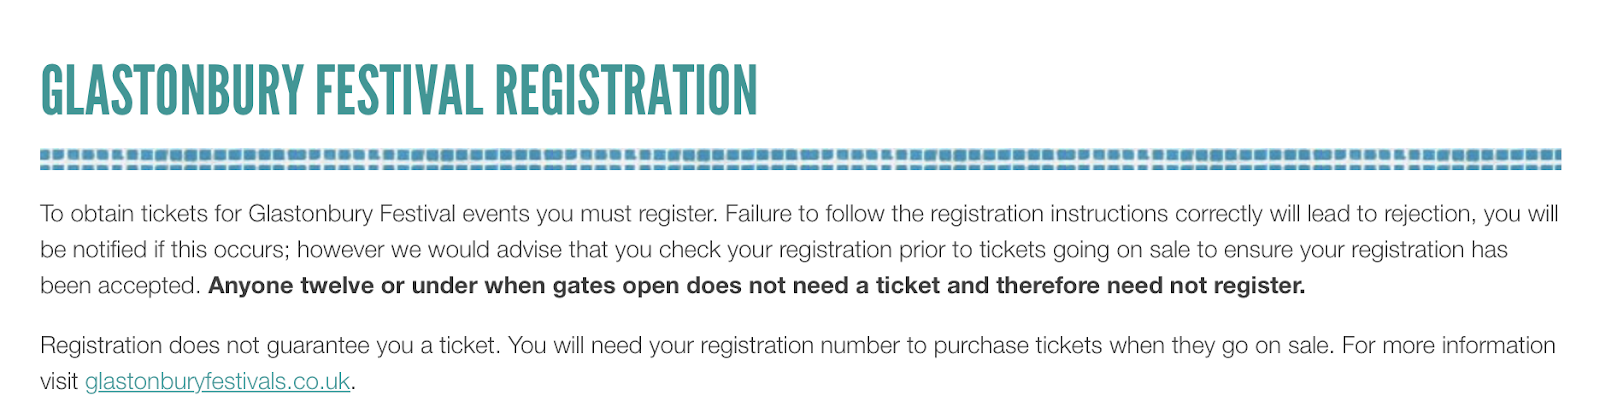 A screenshot from the Glastonbury Festival Registration page - which says "To obtain tickets for glastonbury festival events you must register. Failure to follow the registration instructions correctly will lead to rejection, you will be notified if this occurs; however we would advise that you check your registration prior to tickets going on sale to ensure your registration has been accepted. Anyone twelve or under when gates open does not need a ticket and therefore need not register. Registration does not guarantee you a ticket. You will need your registration number to purachase tickets when they go on sale."